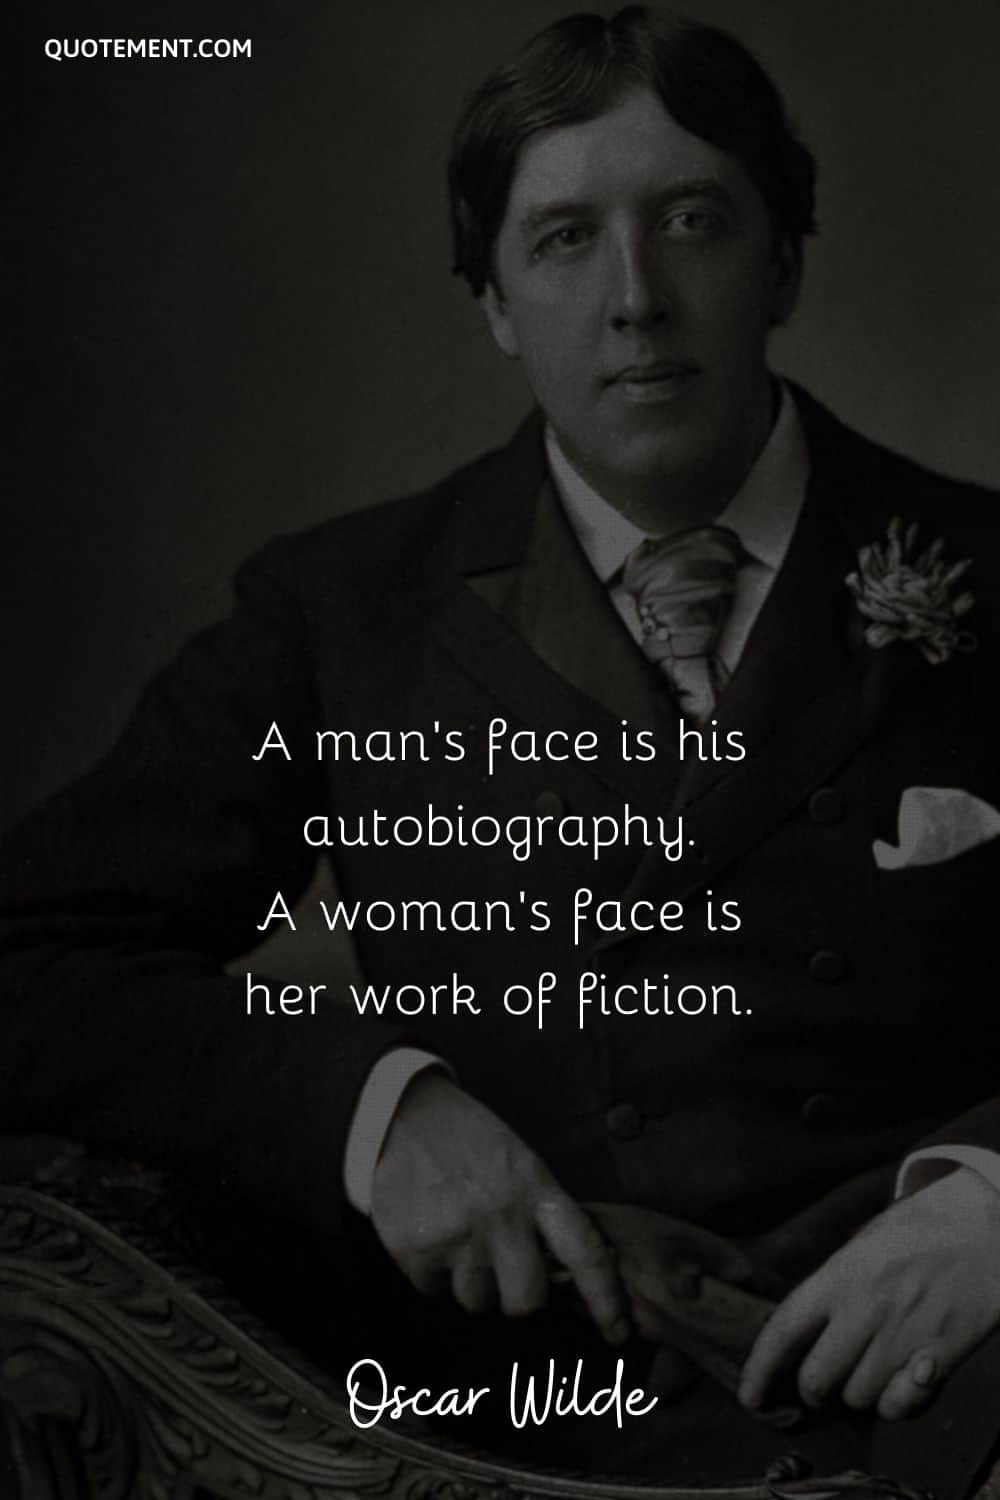 A man's face is his autobiography